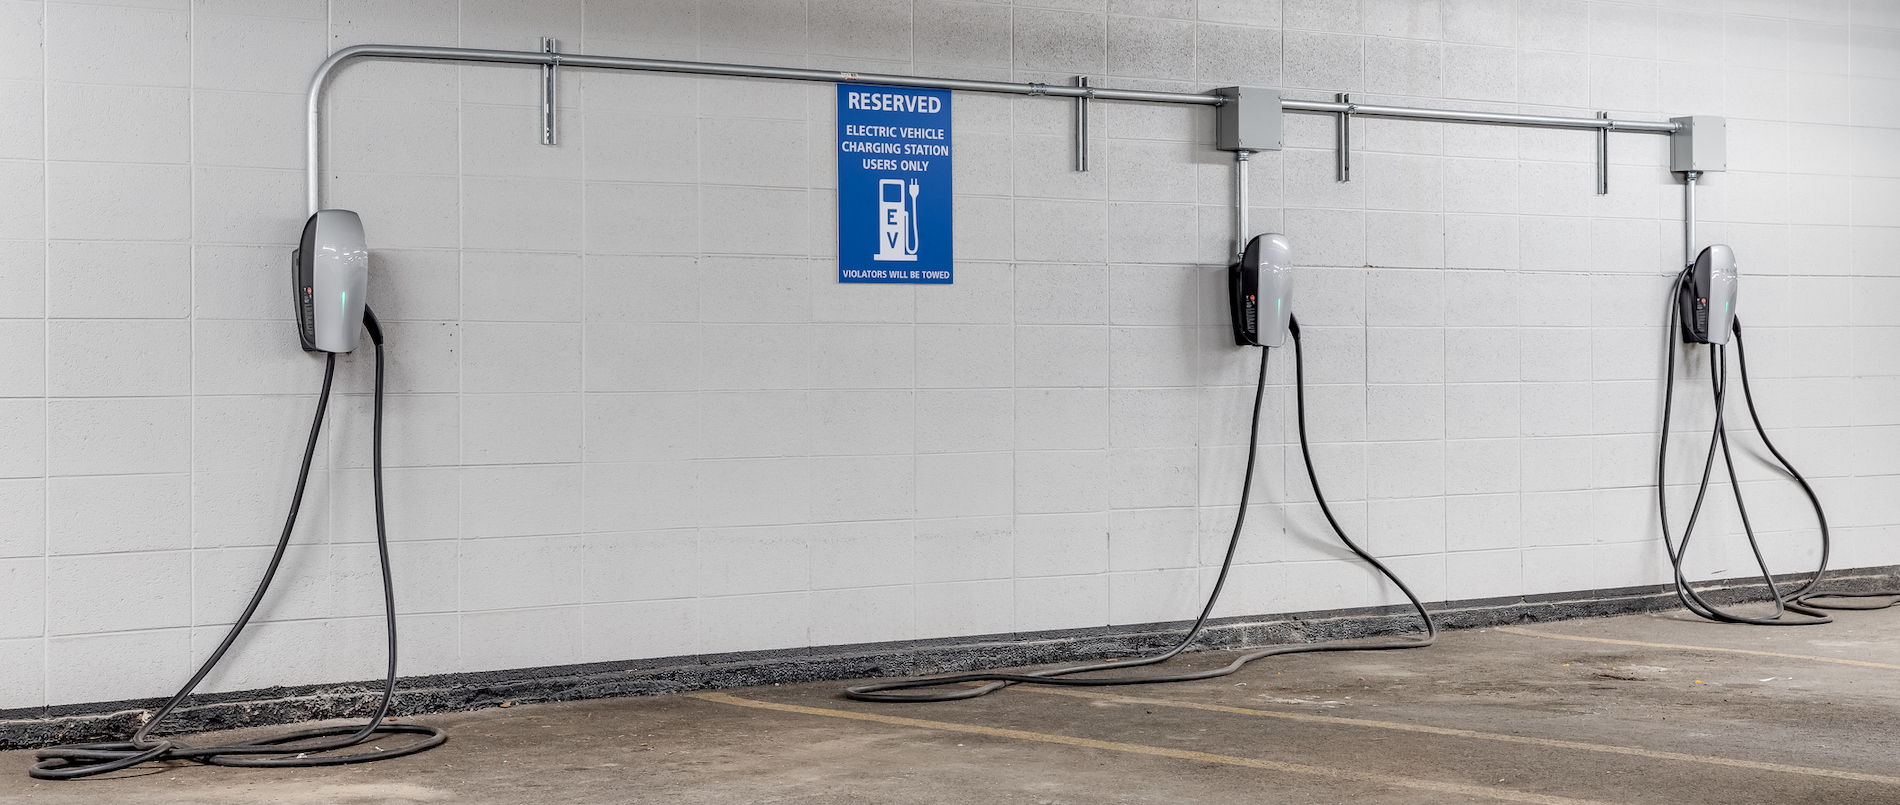 EV Chargers in Parking Garage